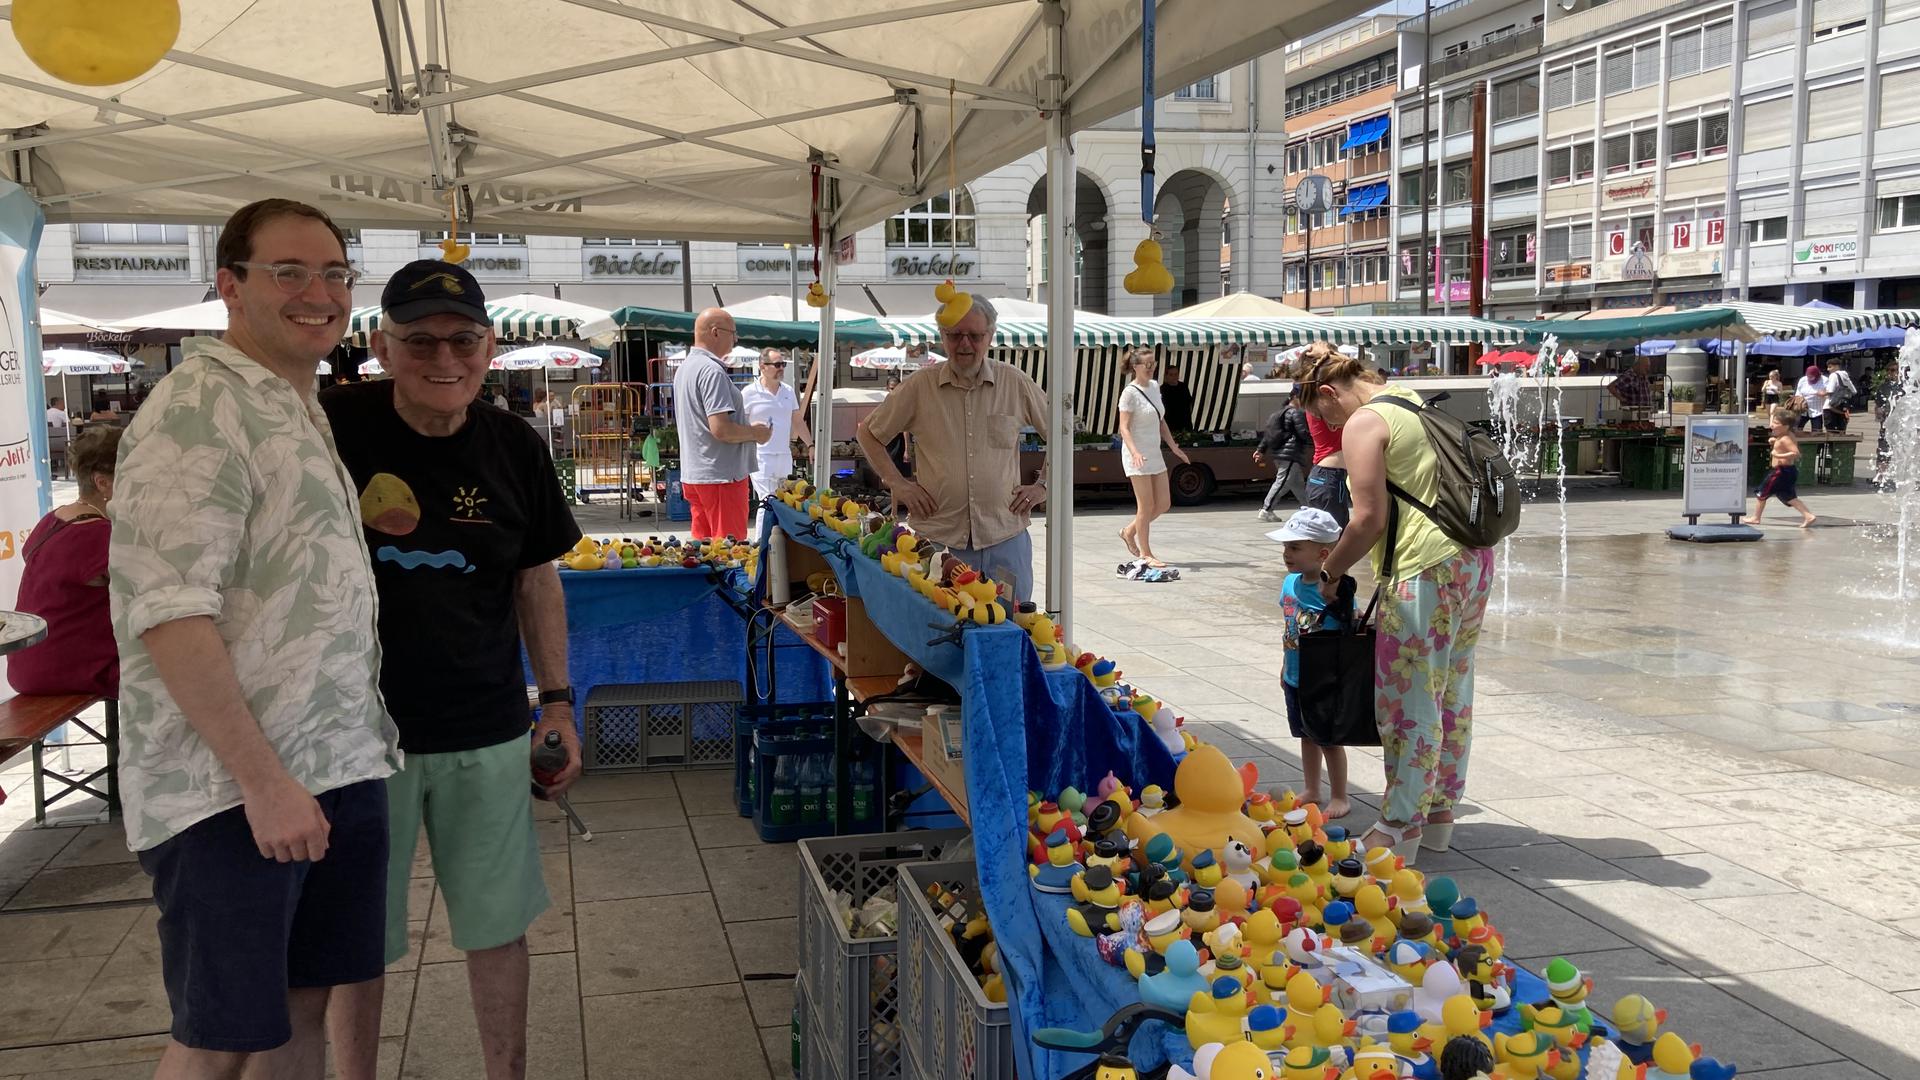 Rubber ducks are sold at the duck racing stand.